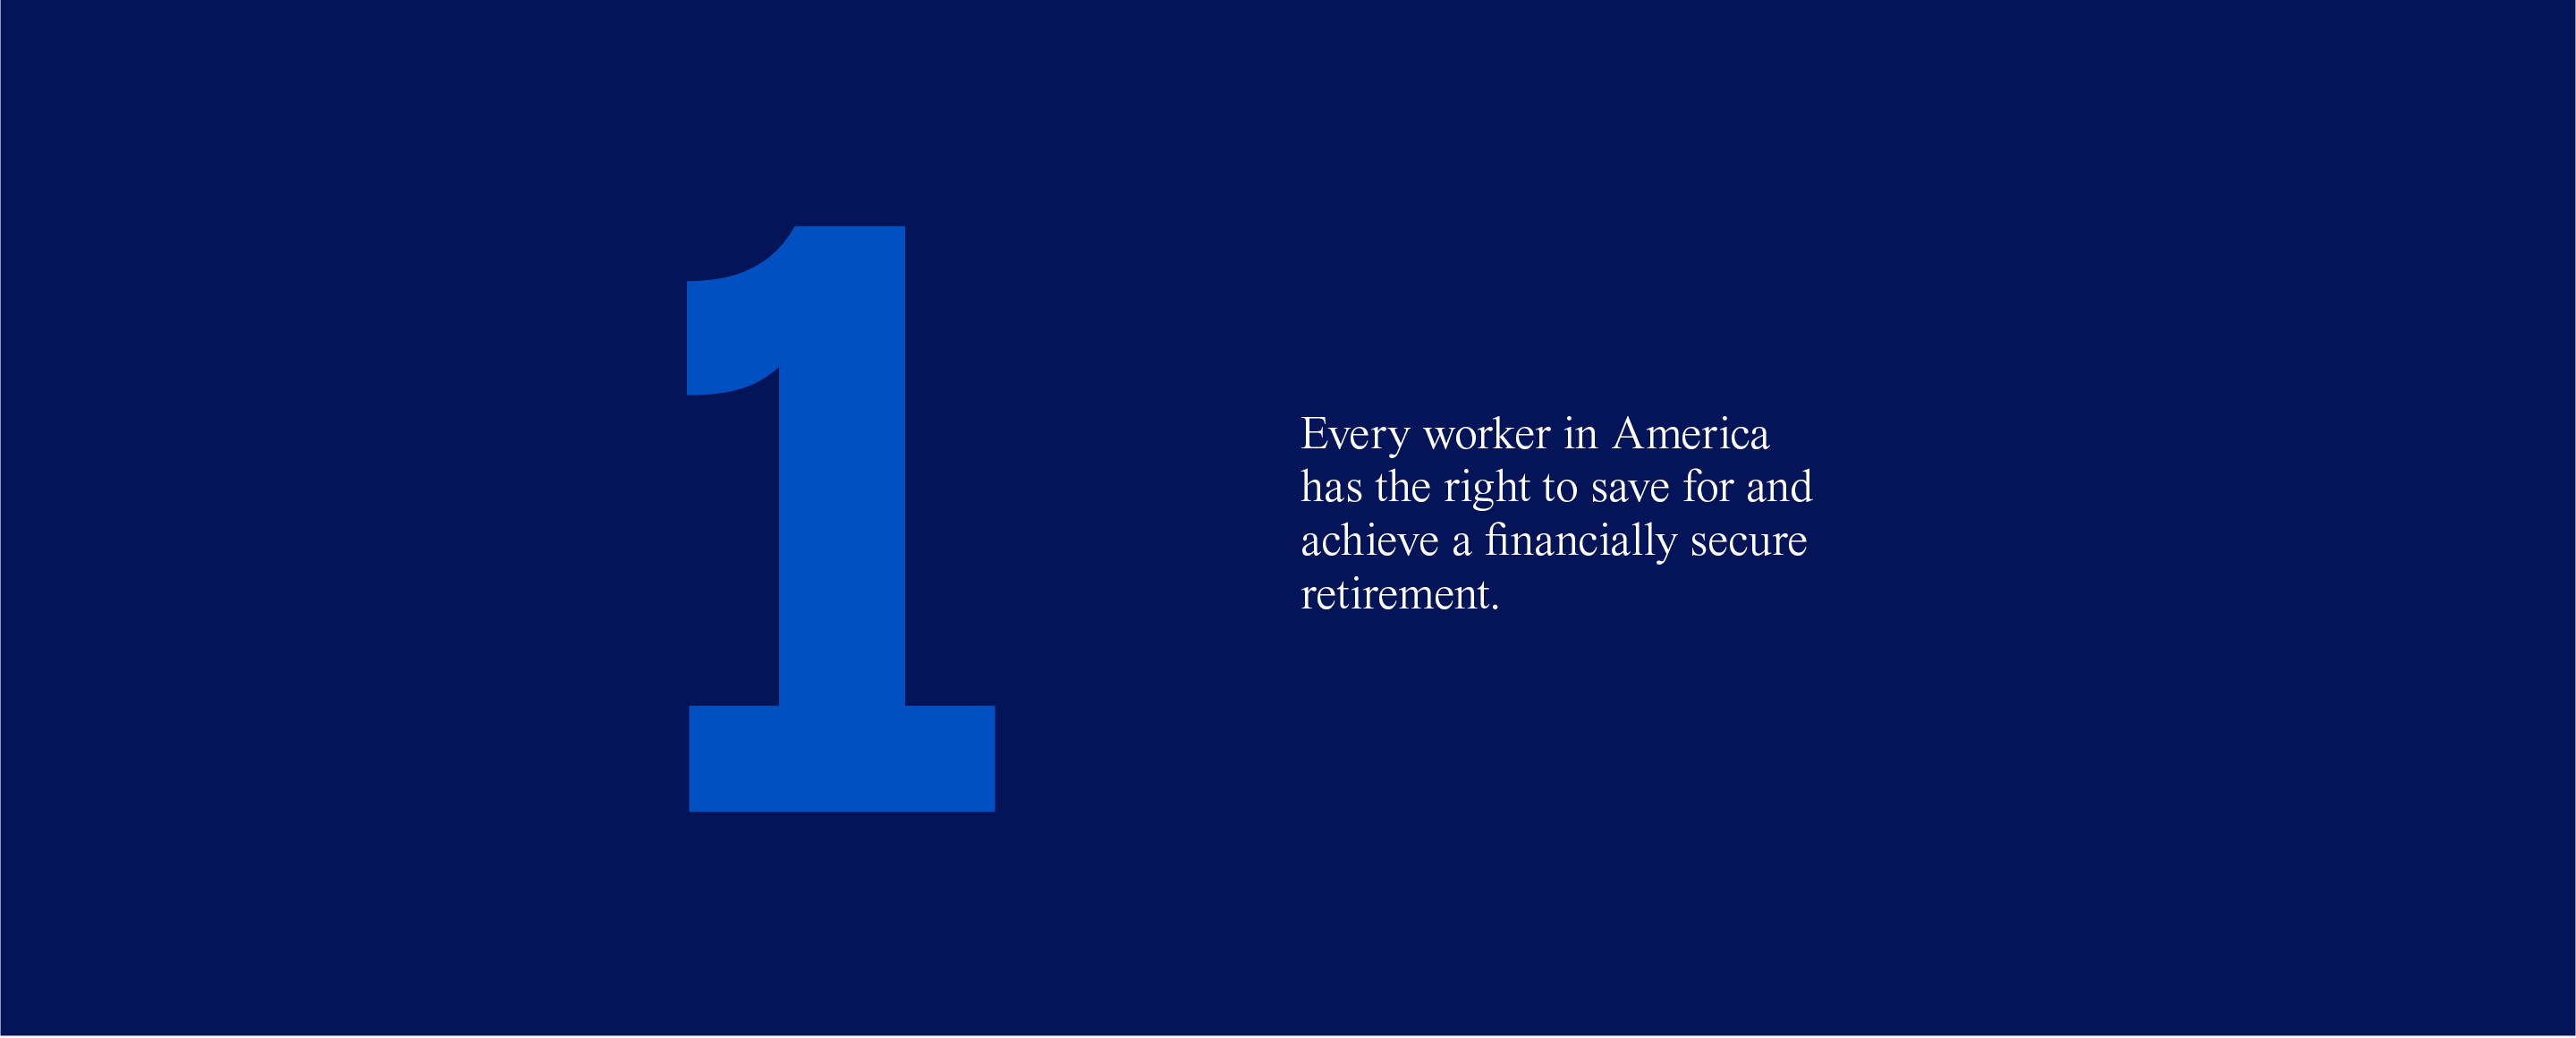 1. Every worker in America has the right to save for and achieve a financially secure retirement.